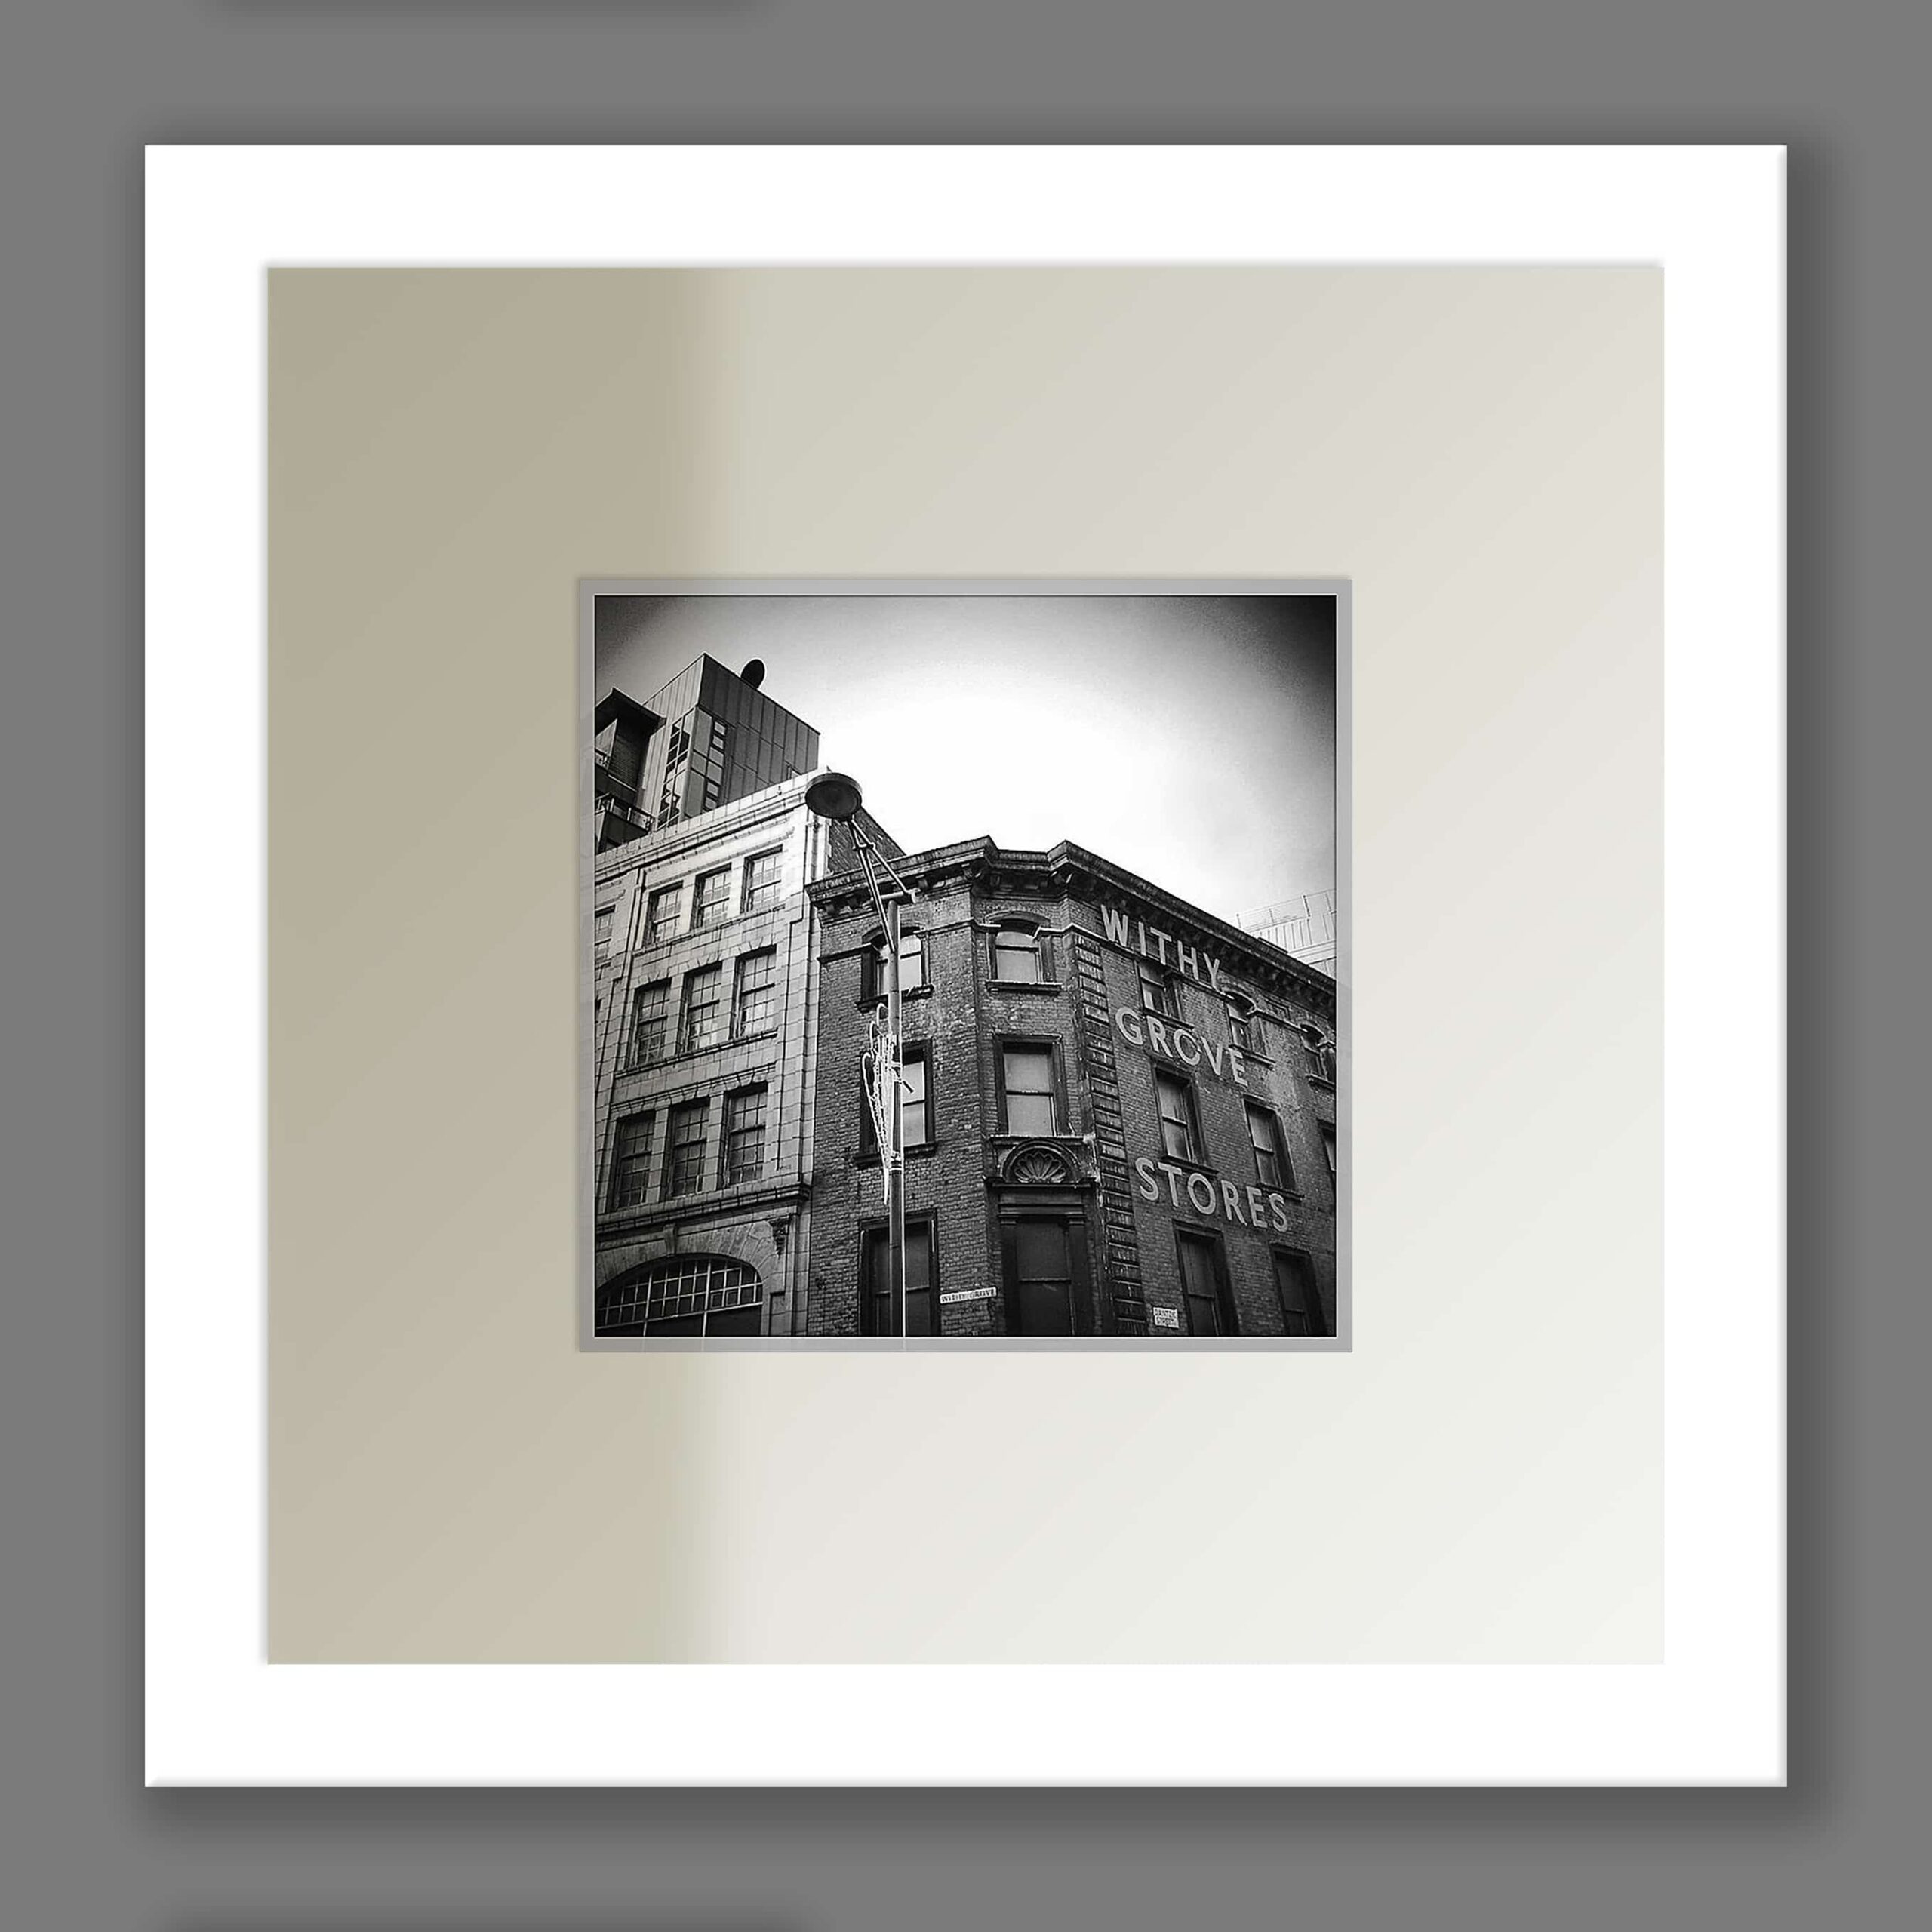 Black and White Withy Grove Stores | Micro Manchester Series Micro Manchester colour 2